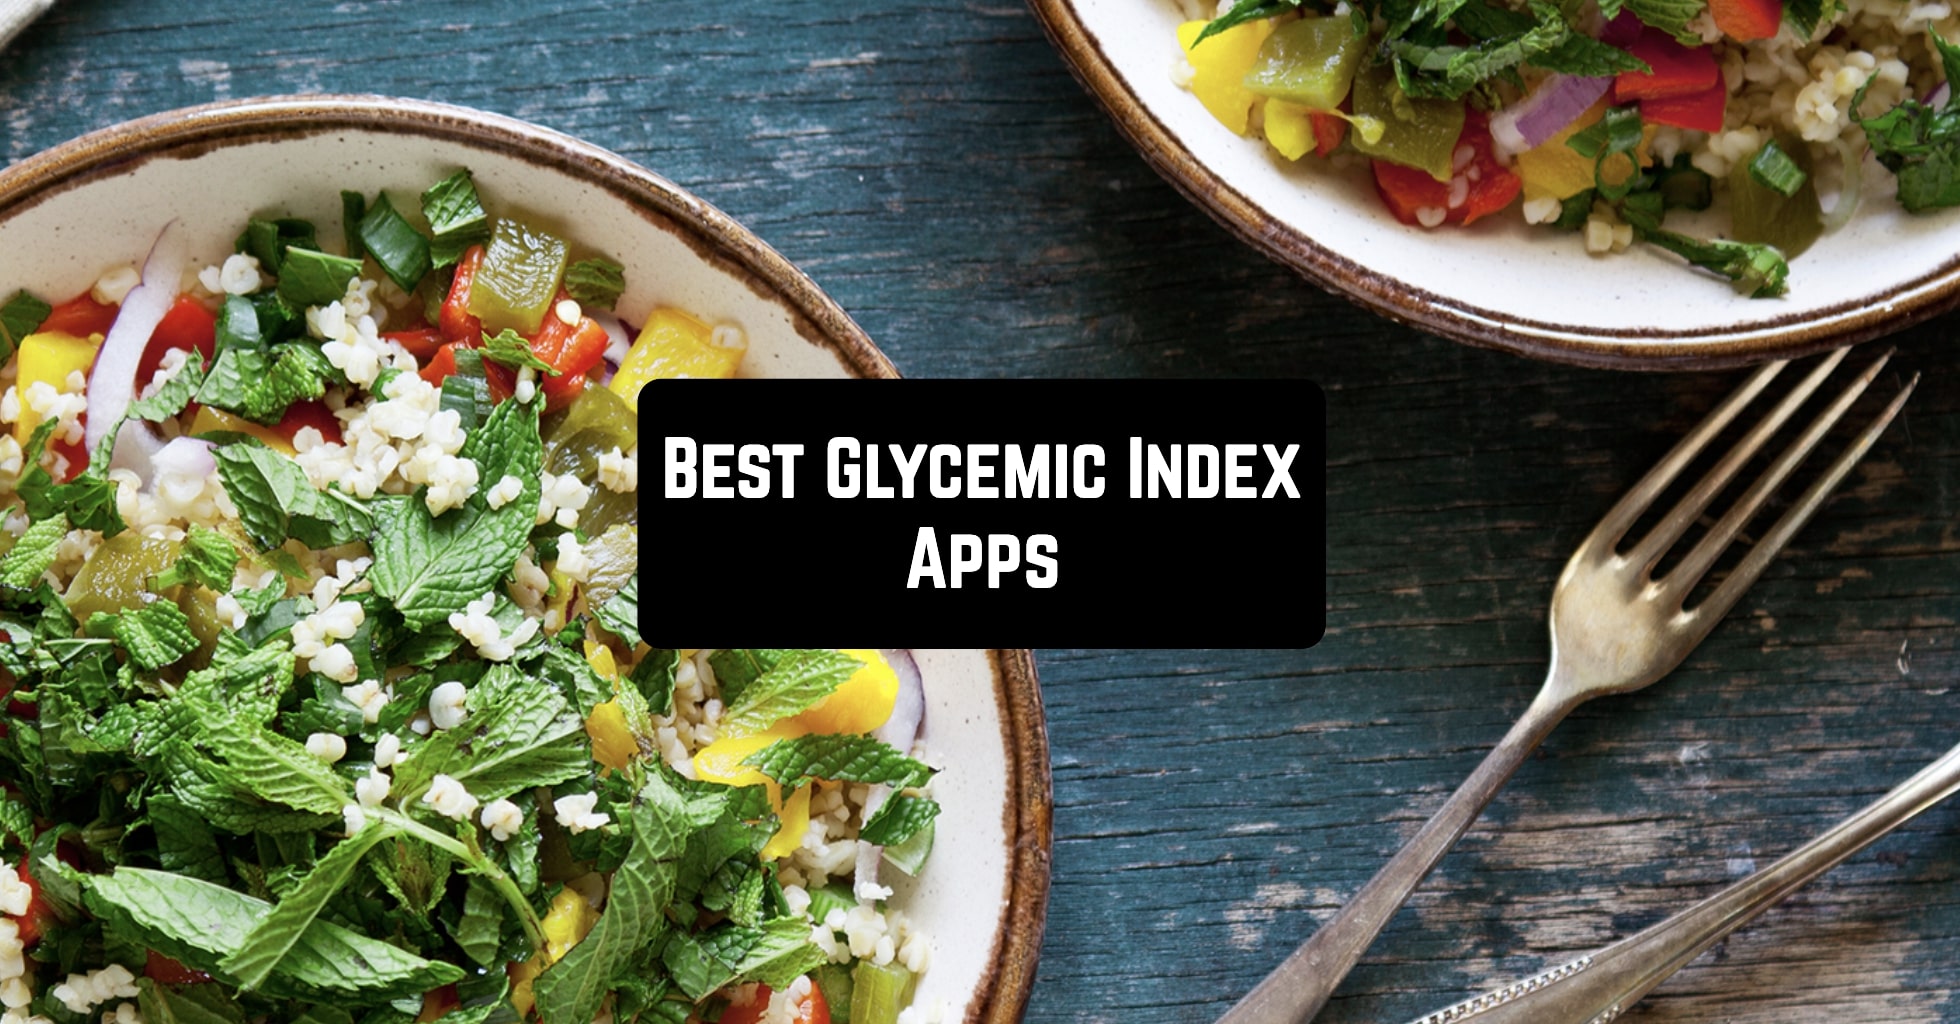 5 Best Glycemic Index Apps for Android & iOS